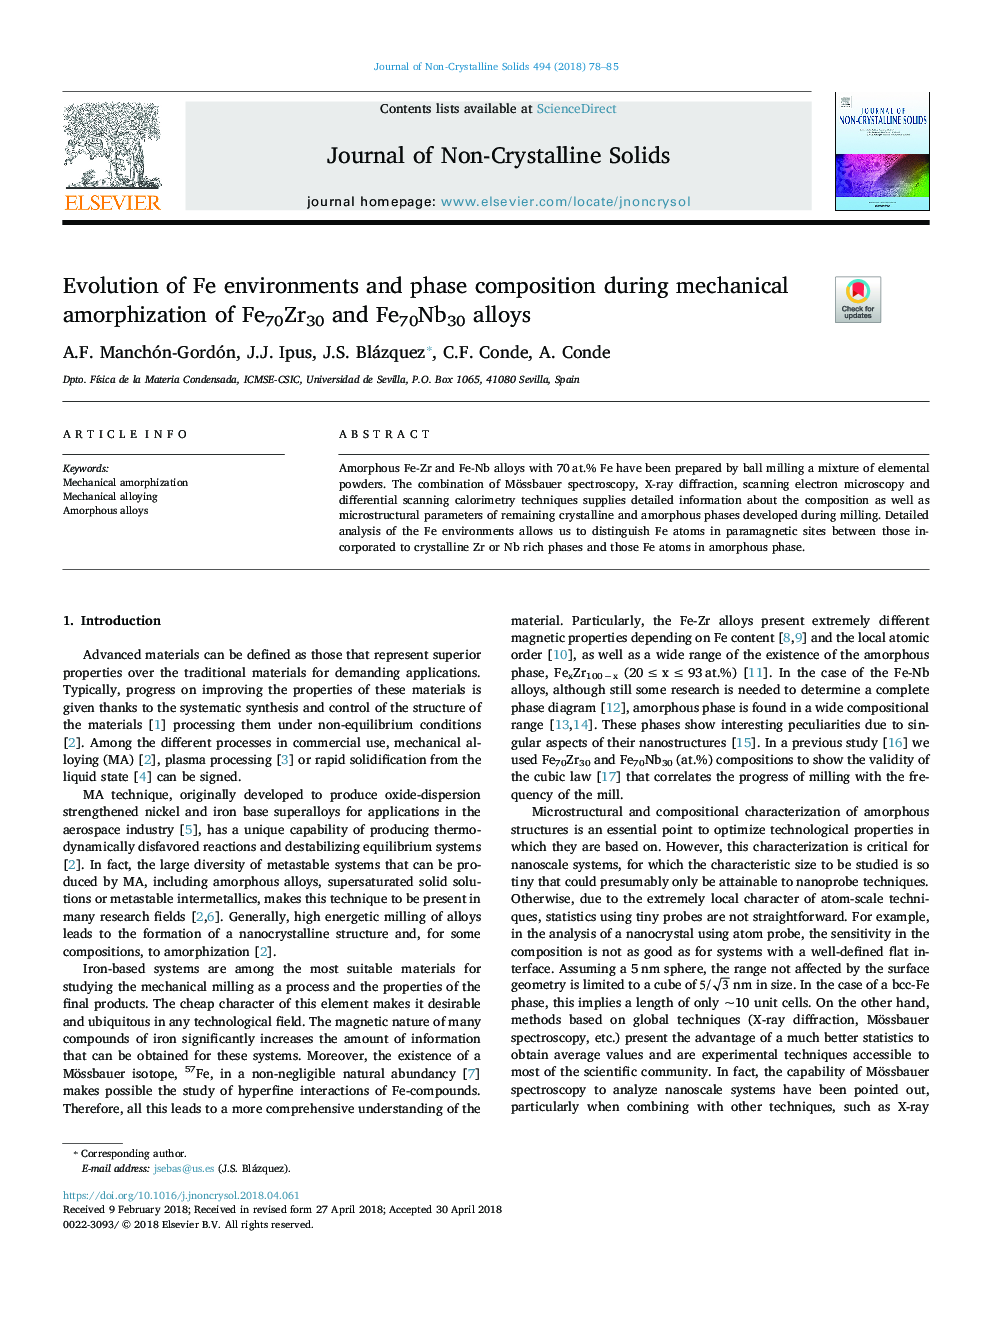 Evolution of Fe environments and phase composition during mechanical amorphization of Fe70Zr30 and Fe70Nb30 alloys